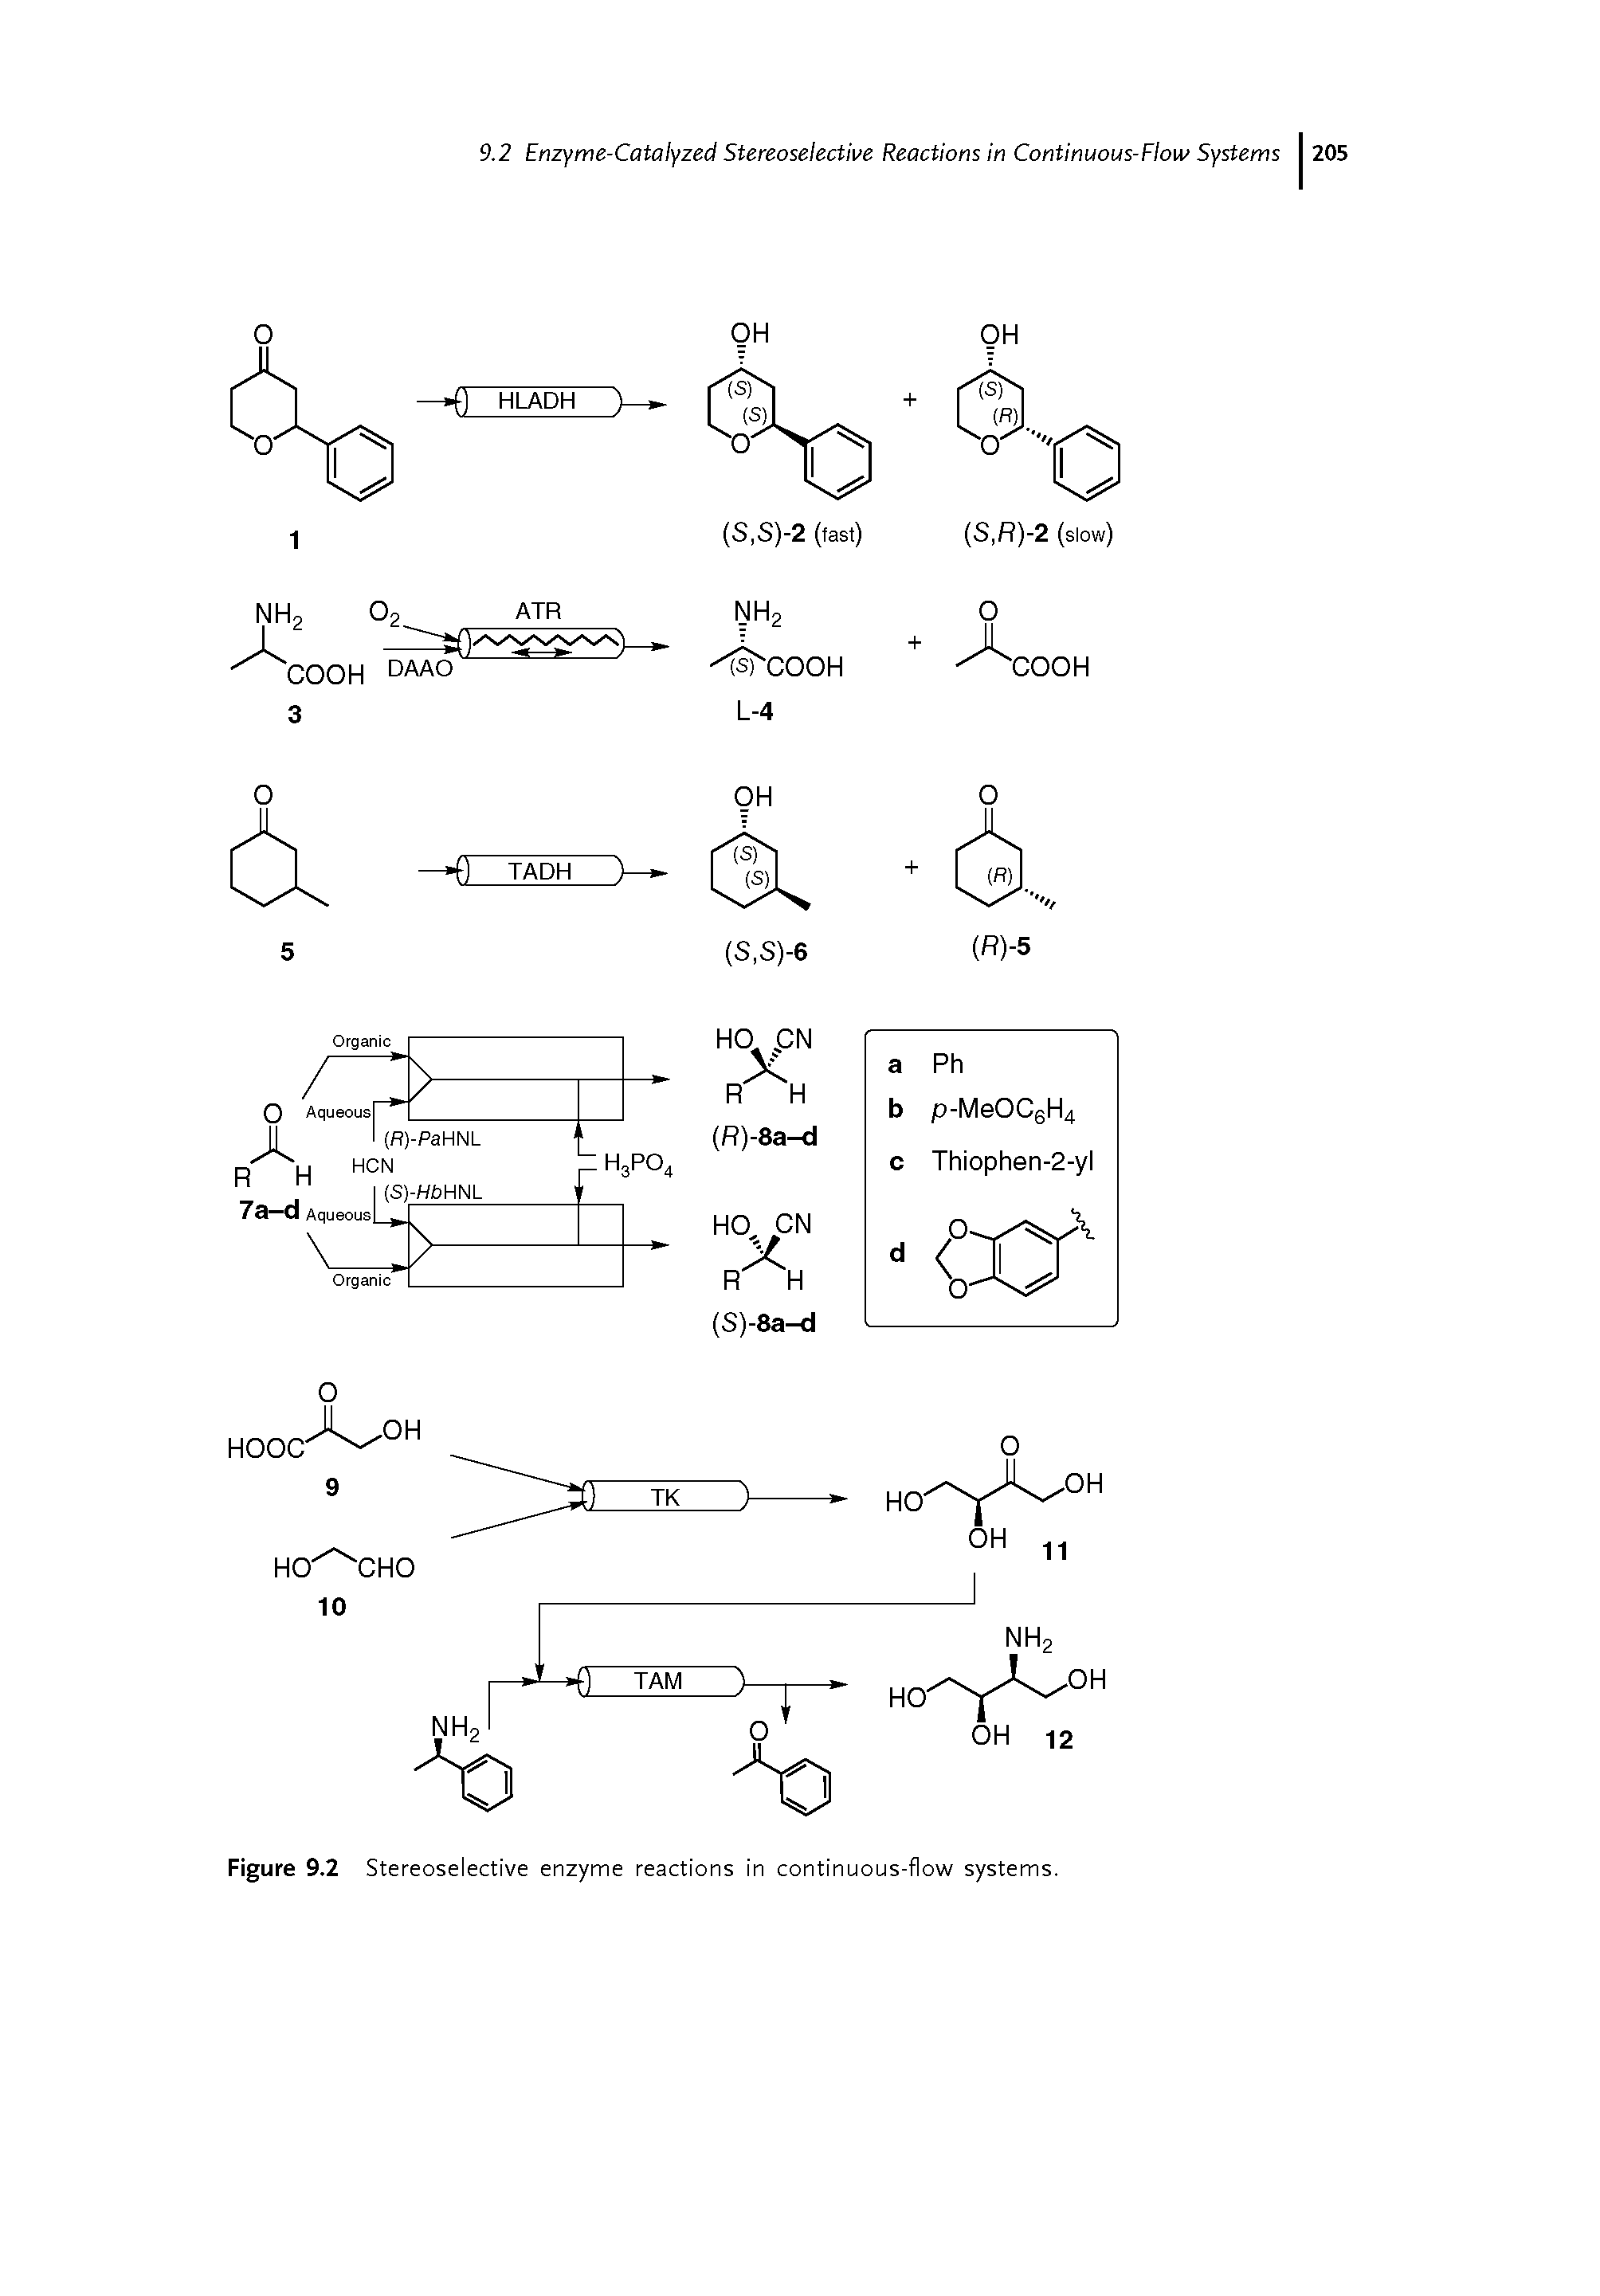 Figure 9.2 Stereoselective enzyme reactions in continuous-flow systems.